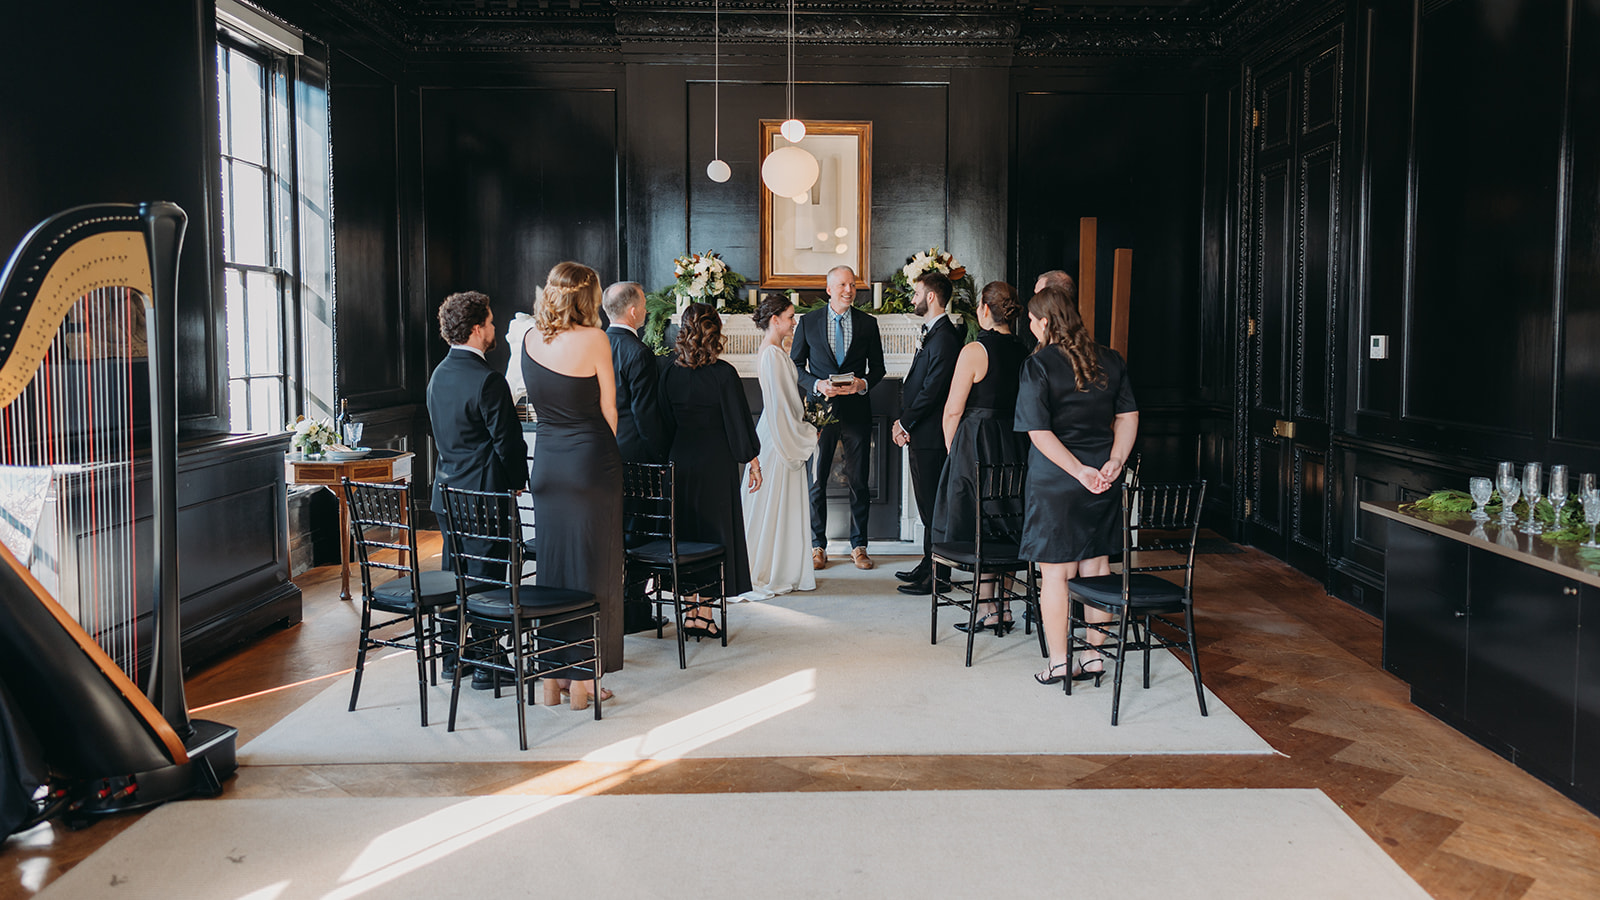 Intimate ceremony at Patterson Mansion Wedding in Washington DC